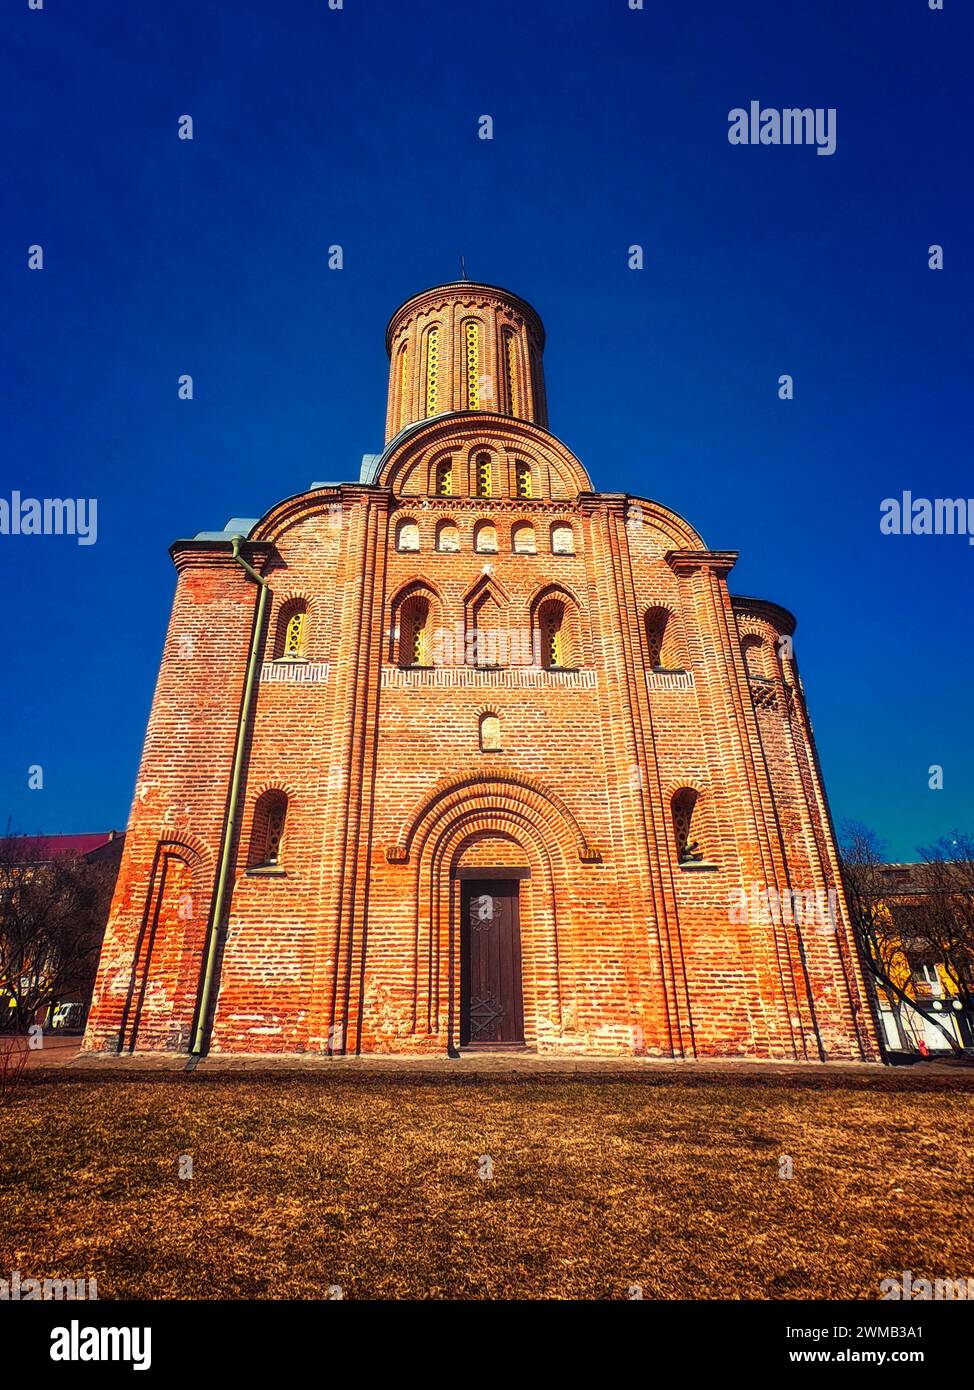 A red brick church with a cylindrical tower, arched doorways, and circular windows under a clear blue sky. Friday Church in Chernihiv. Stock Photo